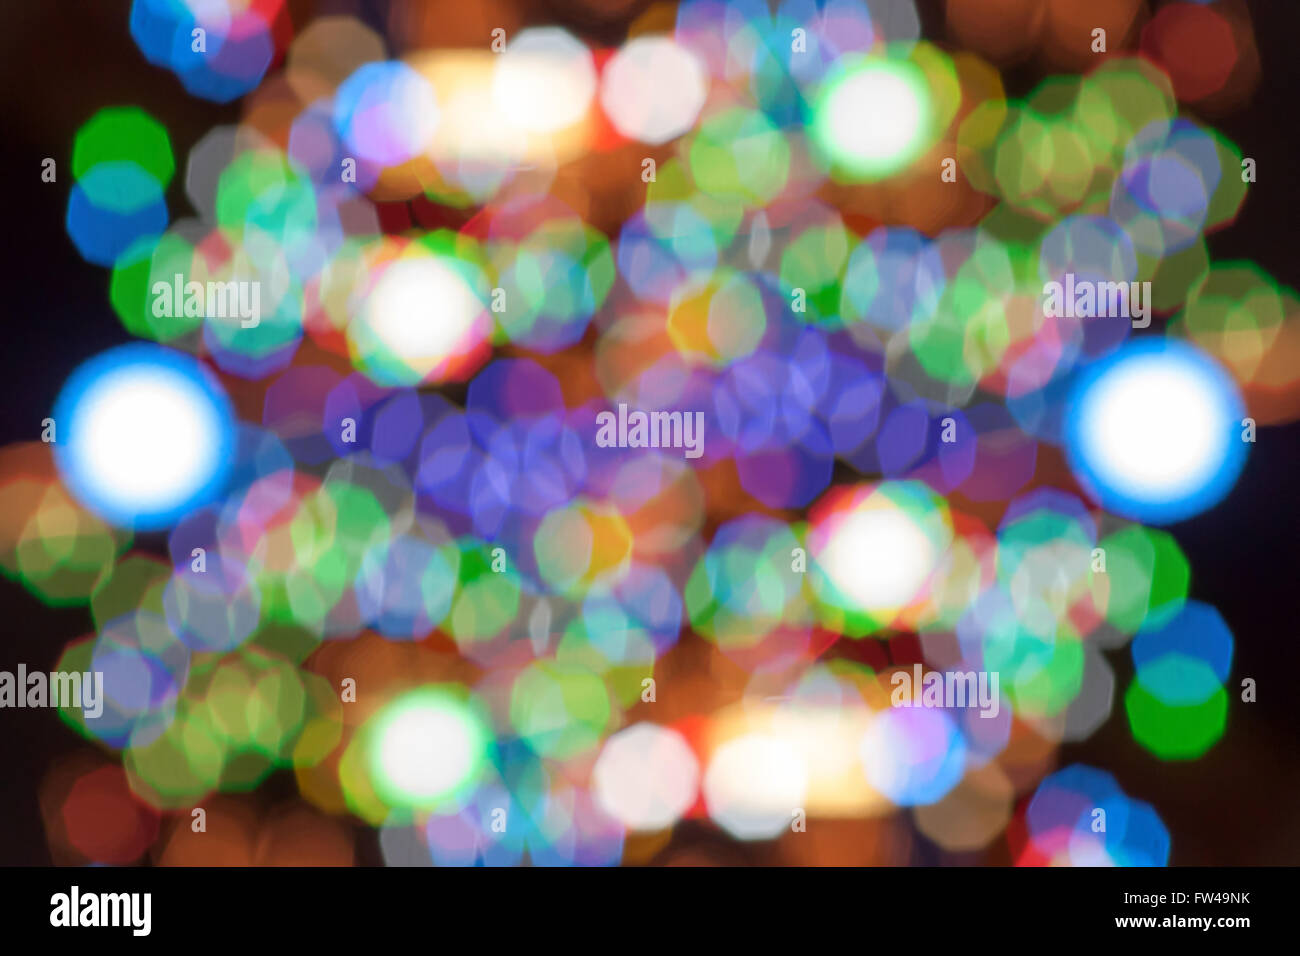 Light more color hexagon and cercle in bokeh out off focus in night. Stock Photo